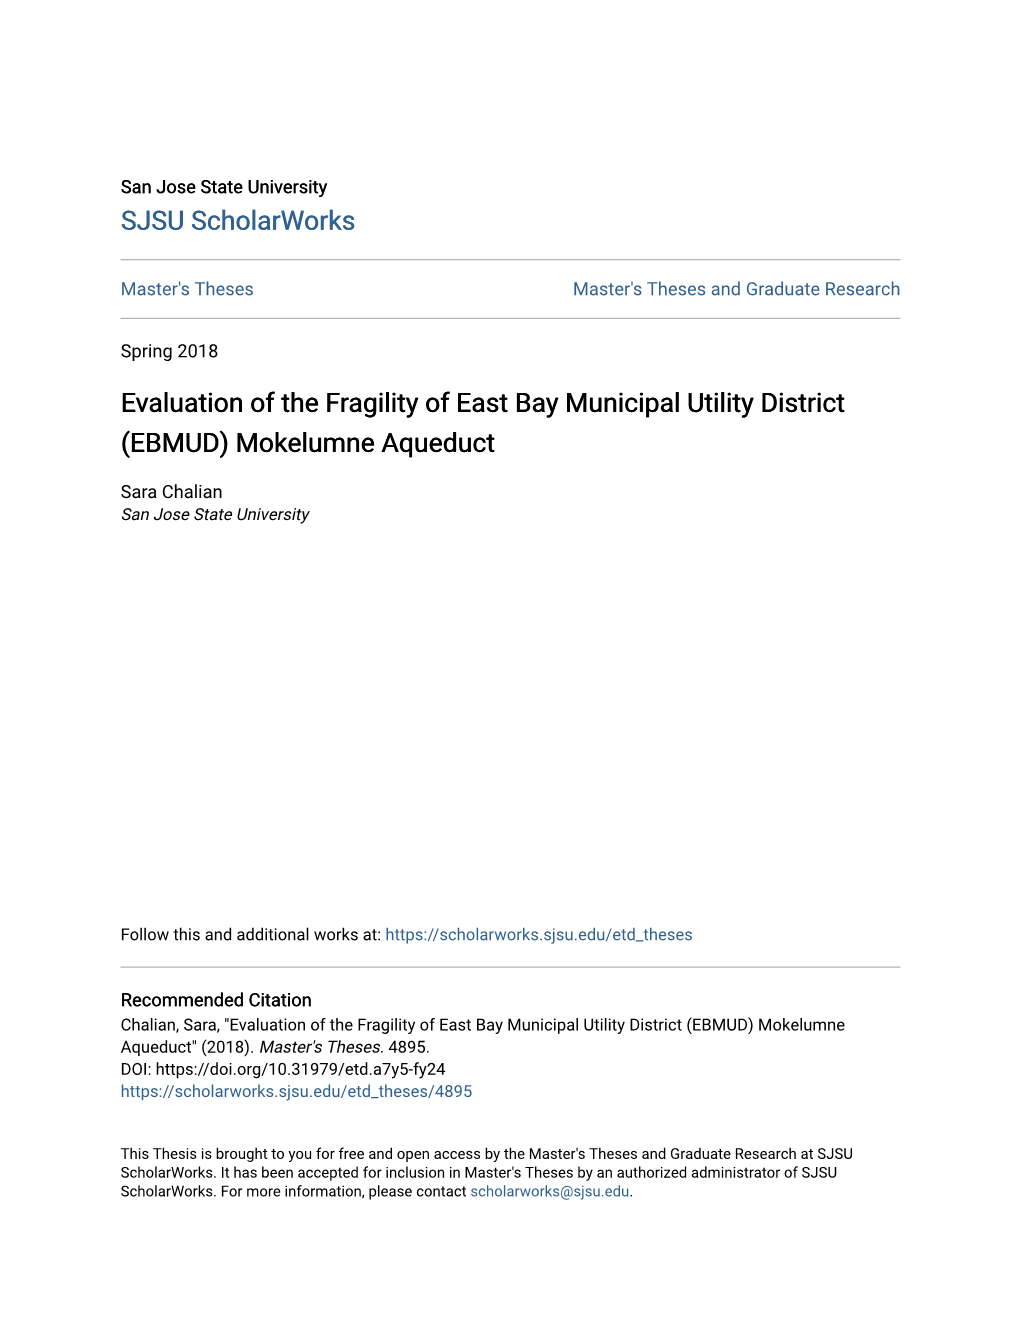 Evaluation of the Fragility of East Bay Municipal Utility District (EBMUD) Mokelumne Aqueduct